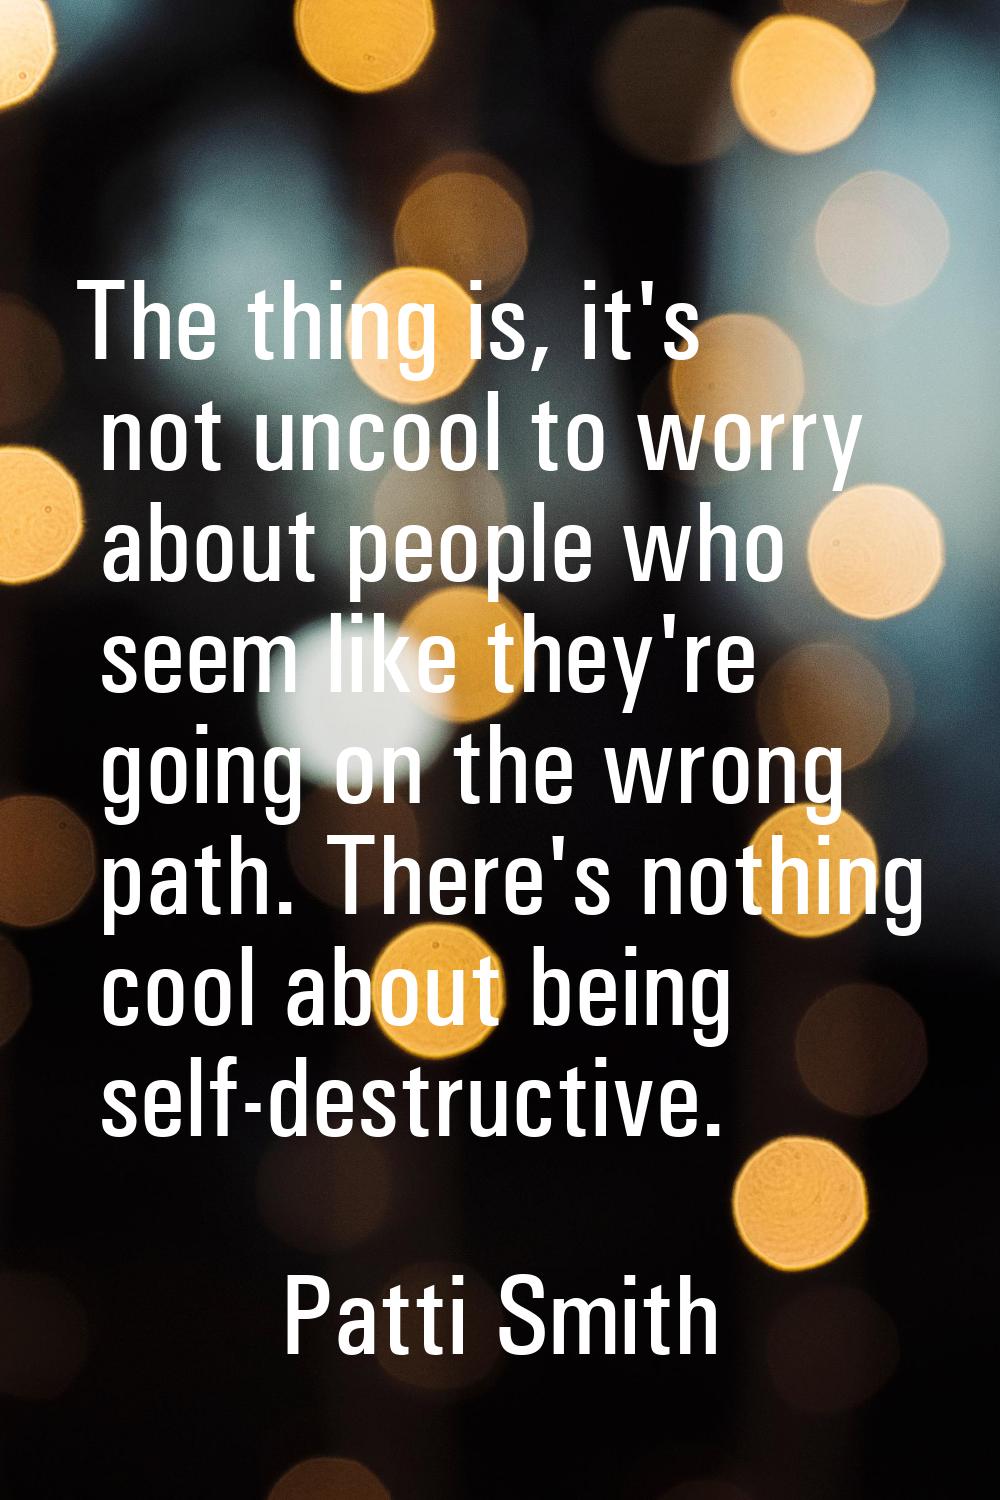 The thing is, it's not uncool to worry about people who seem like they're going on the wrong path. 